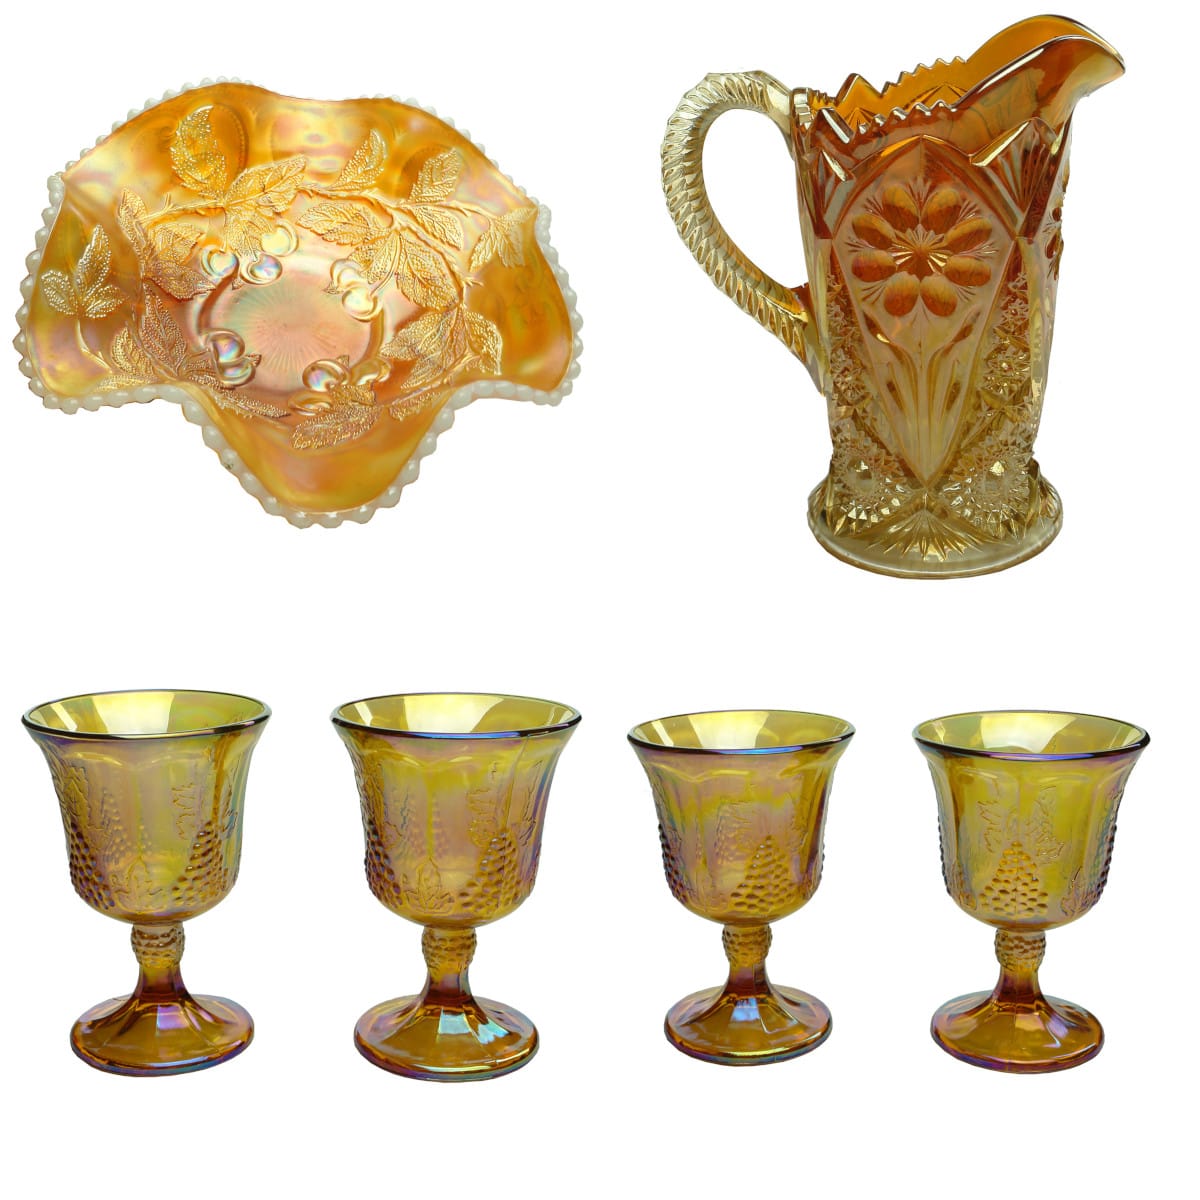 6 Carnival Glass Pieces. Bowl with milk glass edge; Jug; 4 stemmed glasses.